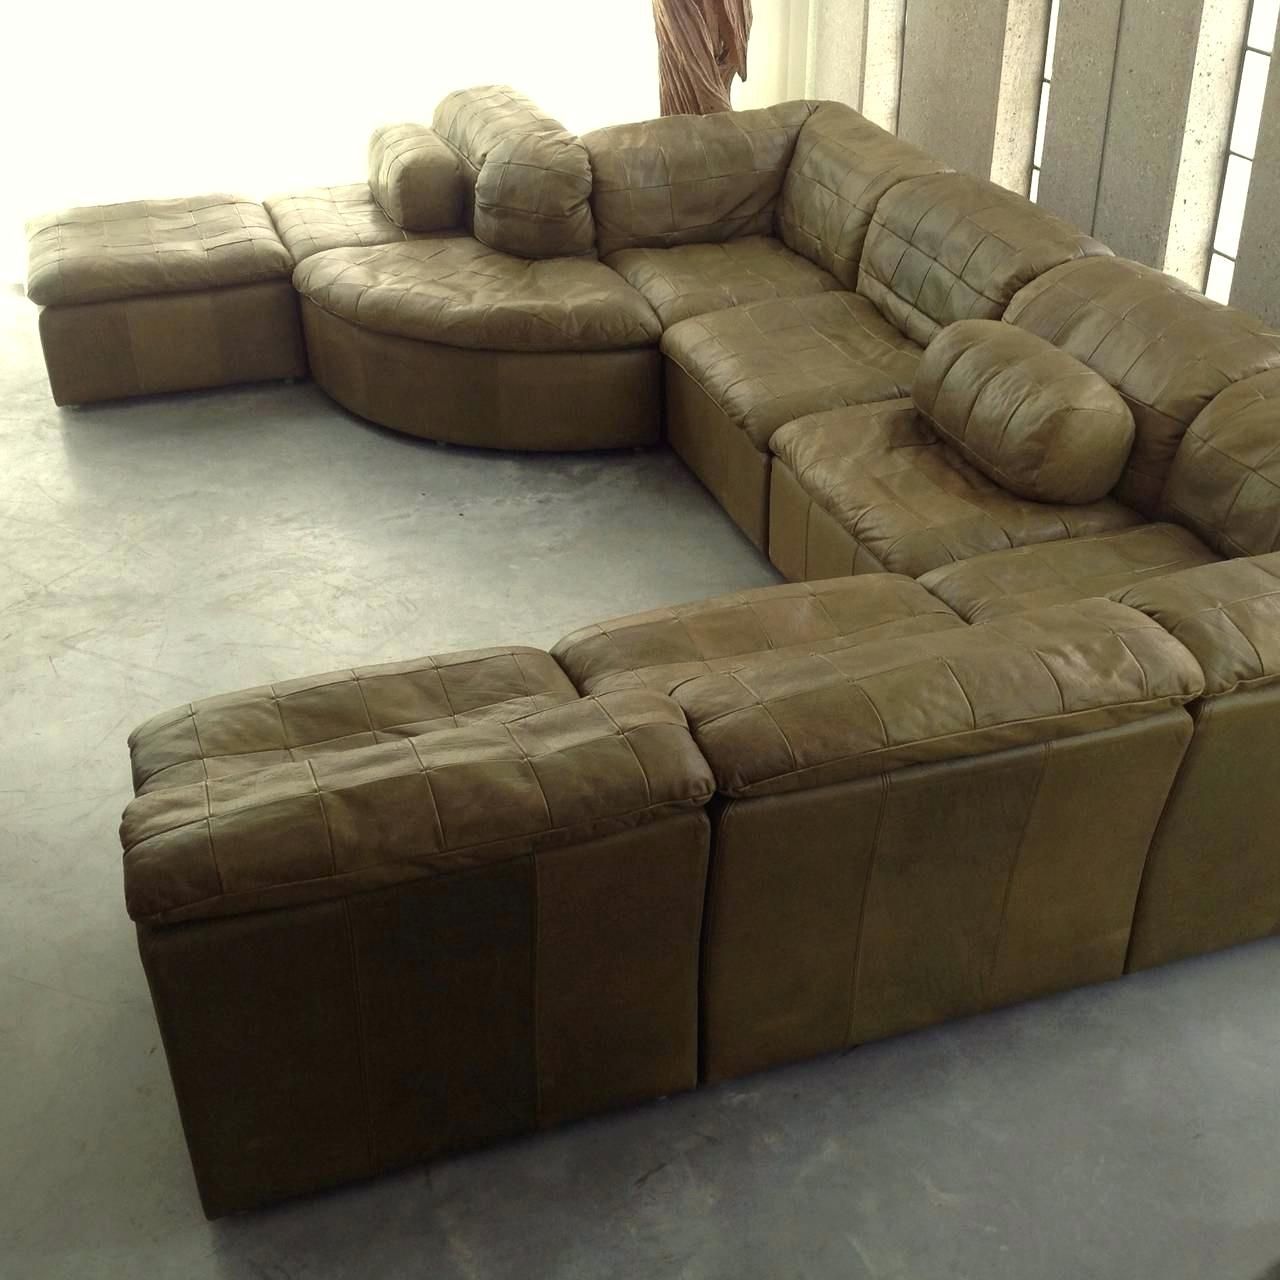 Green Sectional Sas Couches For Sale Sofas Bay Wi Teal Leather Regarding Green Bay Wi Sectional Sofas (View 6 of 10)